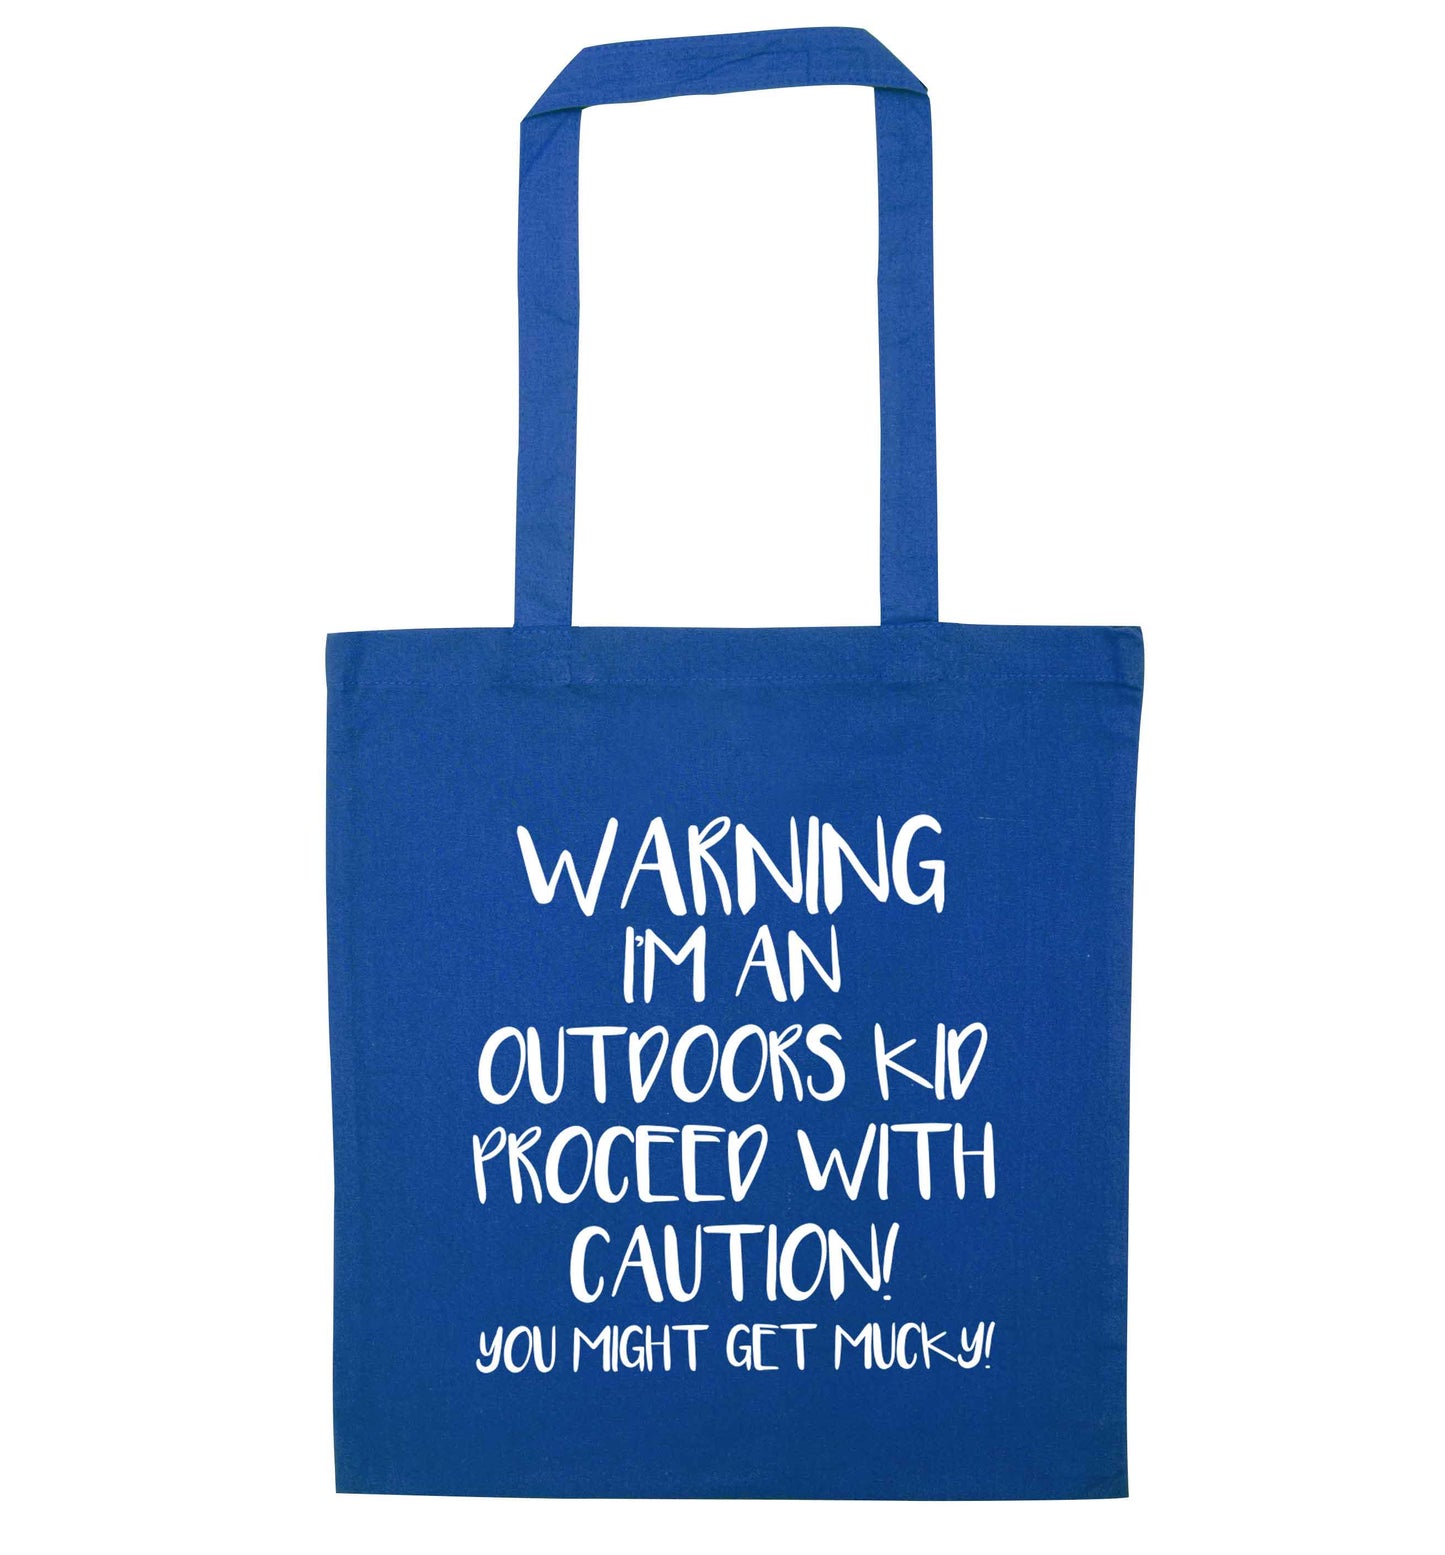 Warning I'm an outdoors kid! Proceed with caution you might get mucky blue tote bag